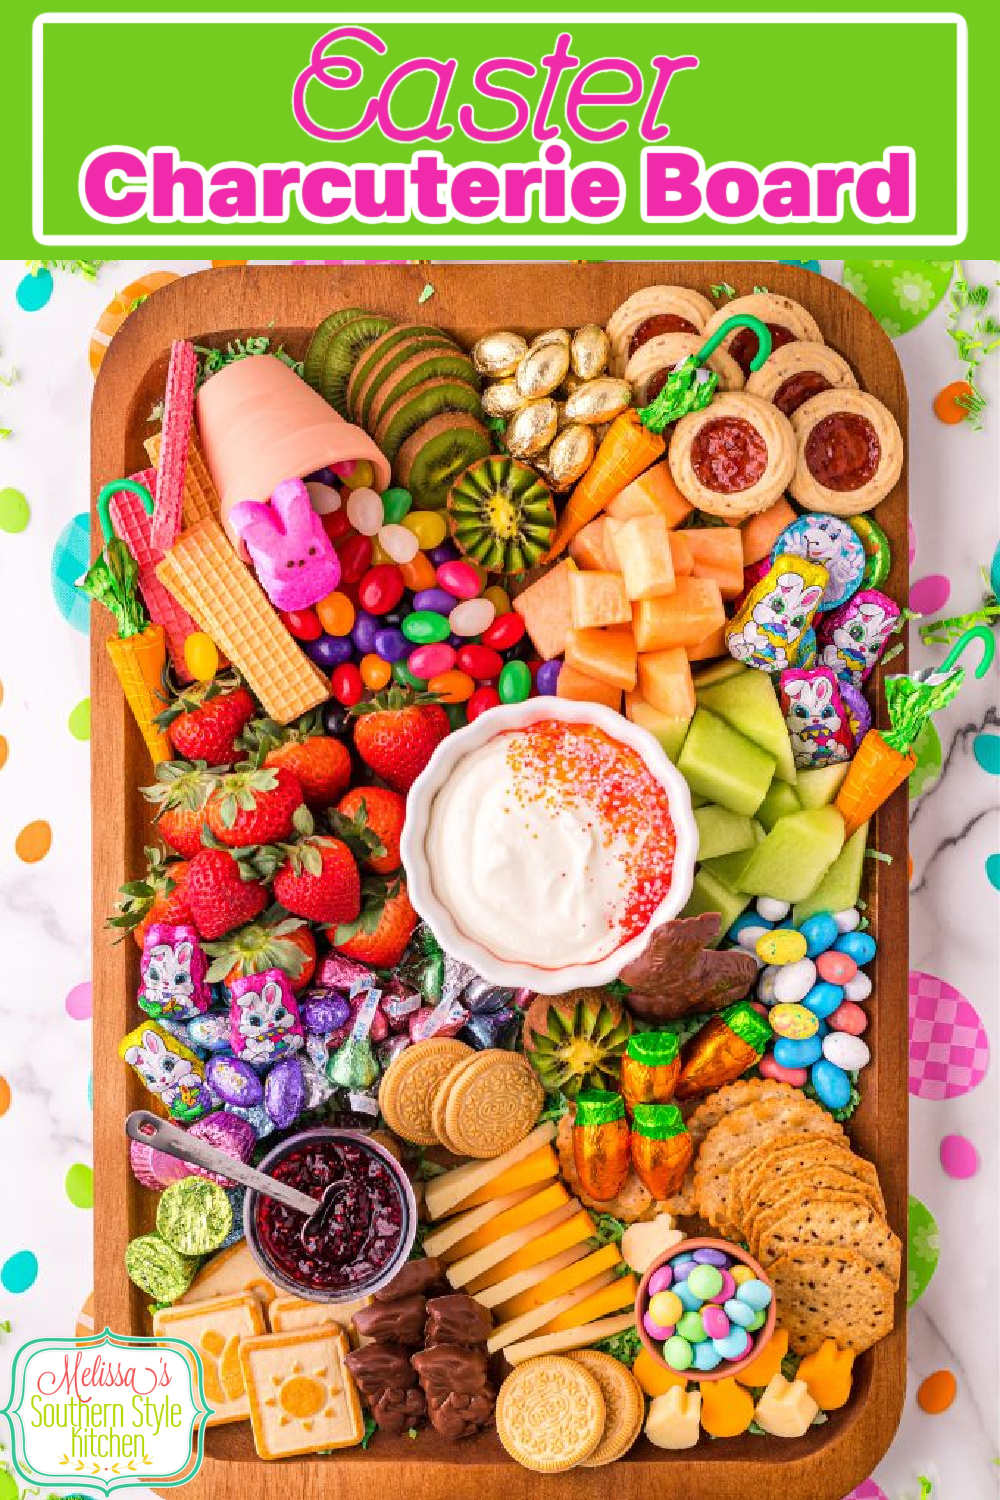 Fill this Easter Charcuterie Board with sweet and salty snacks perfect for your Easter gathering #easter #easterrecipes #desserts #charcuterie #eastercharcuterie #dessertboards #butterboard #dessertrecipes